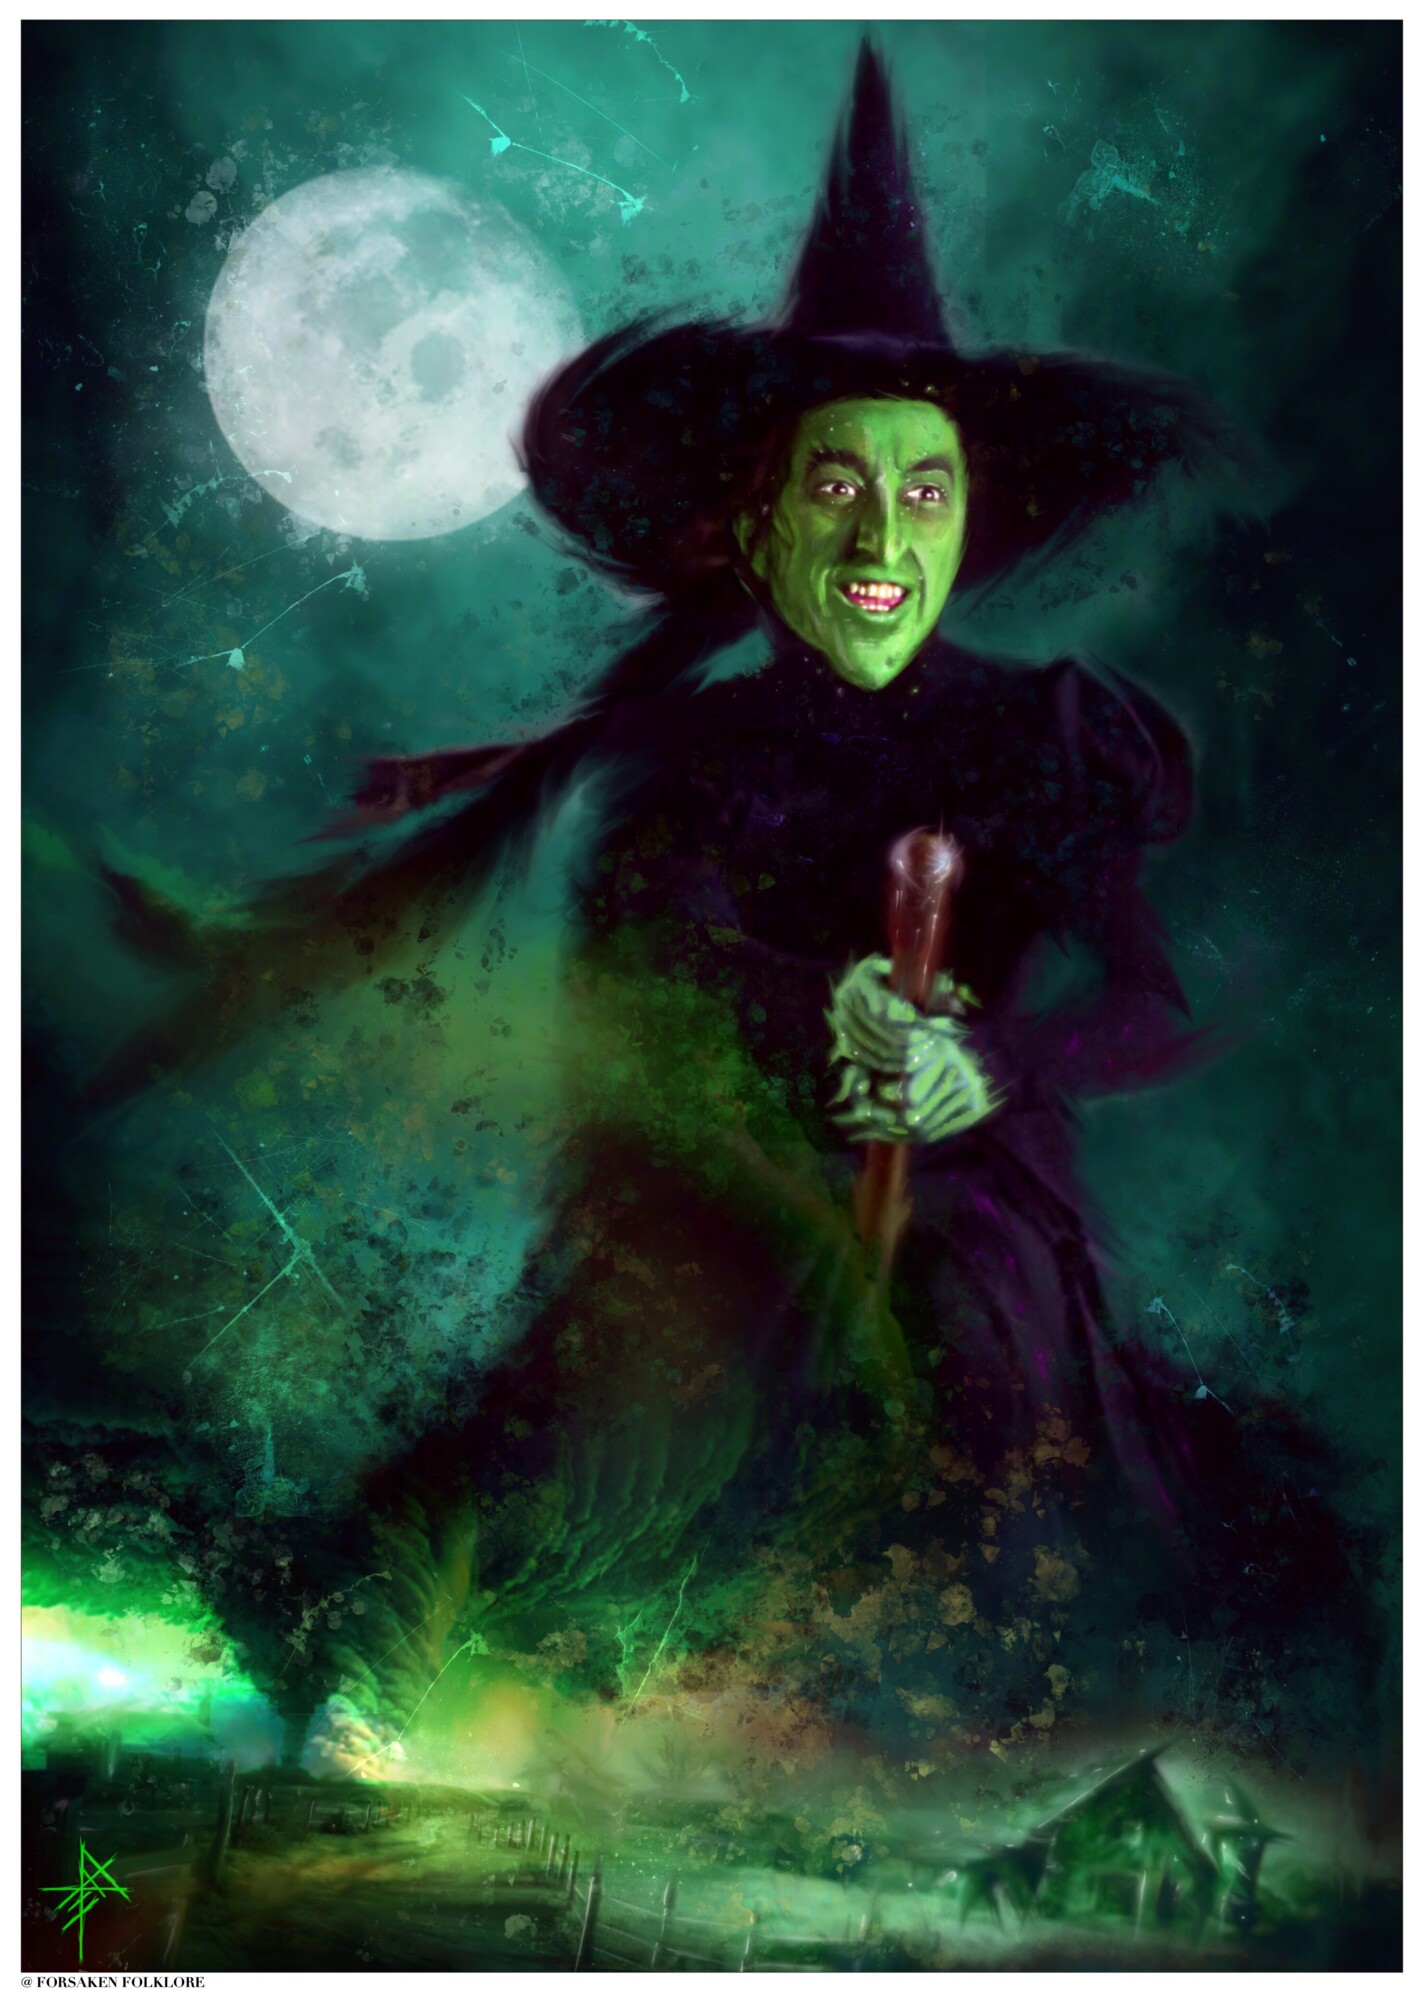 The Wizard of Oz / The Wicked Witch of the West – by Forsaken Folklore